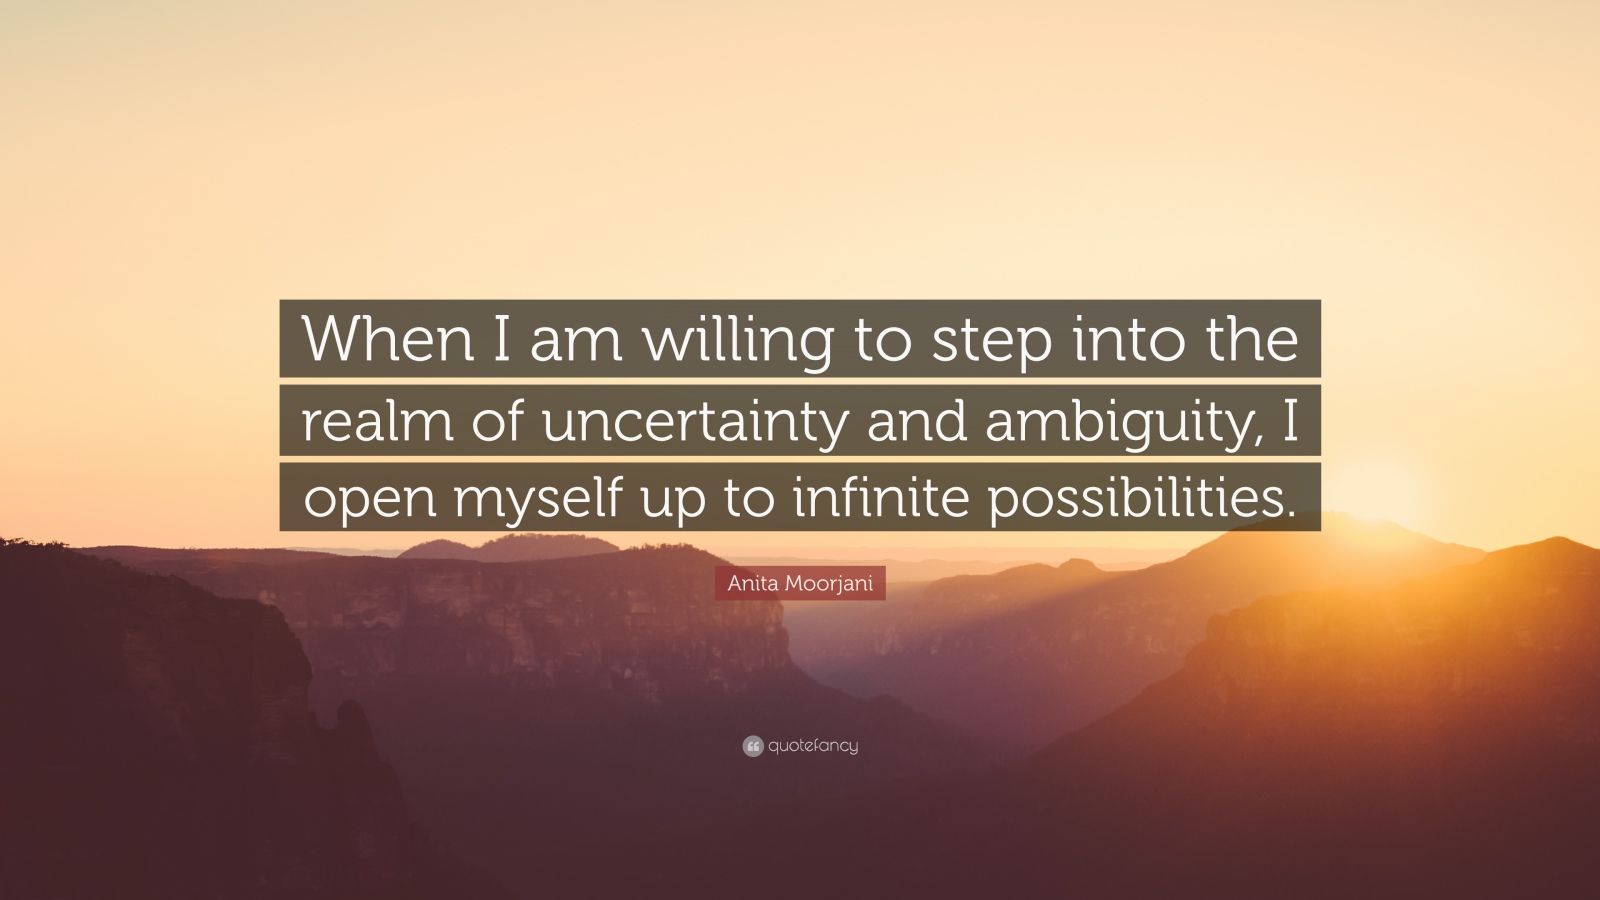 Anita Moorjani Quote: “When I am willing to step into the realm of ...